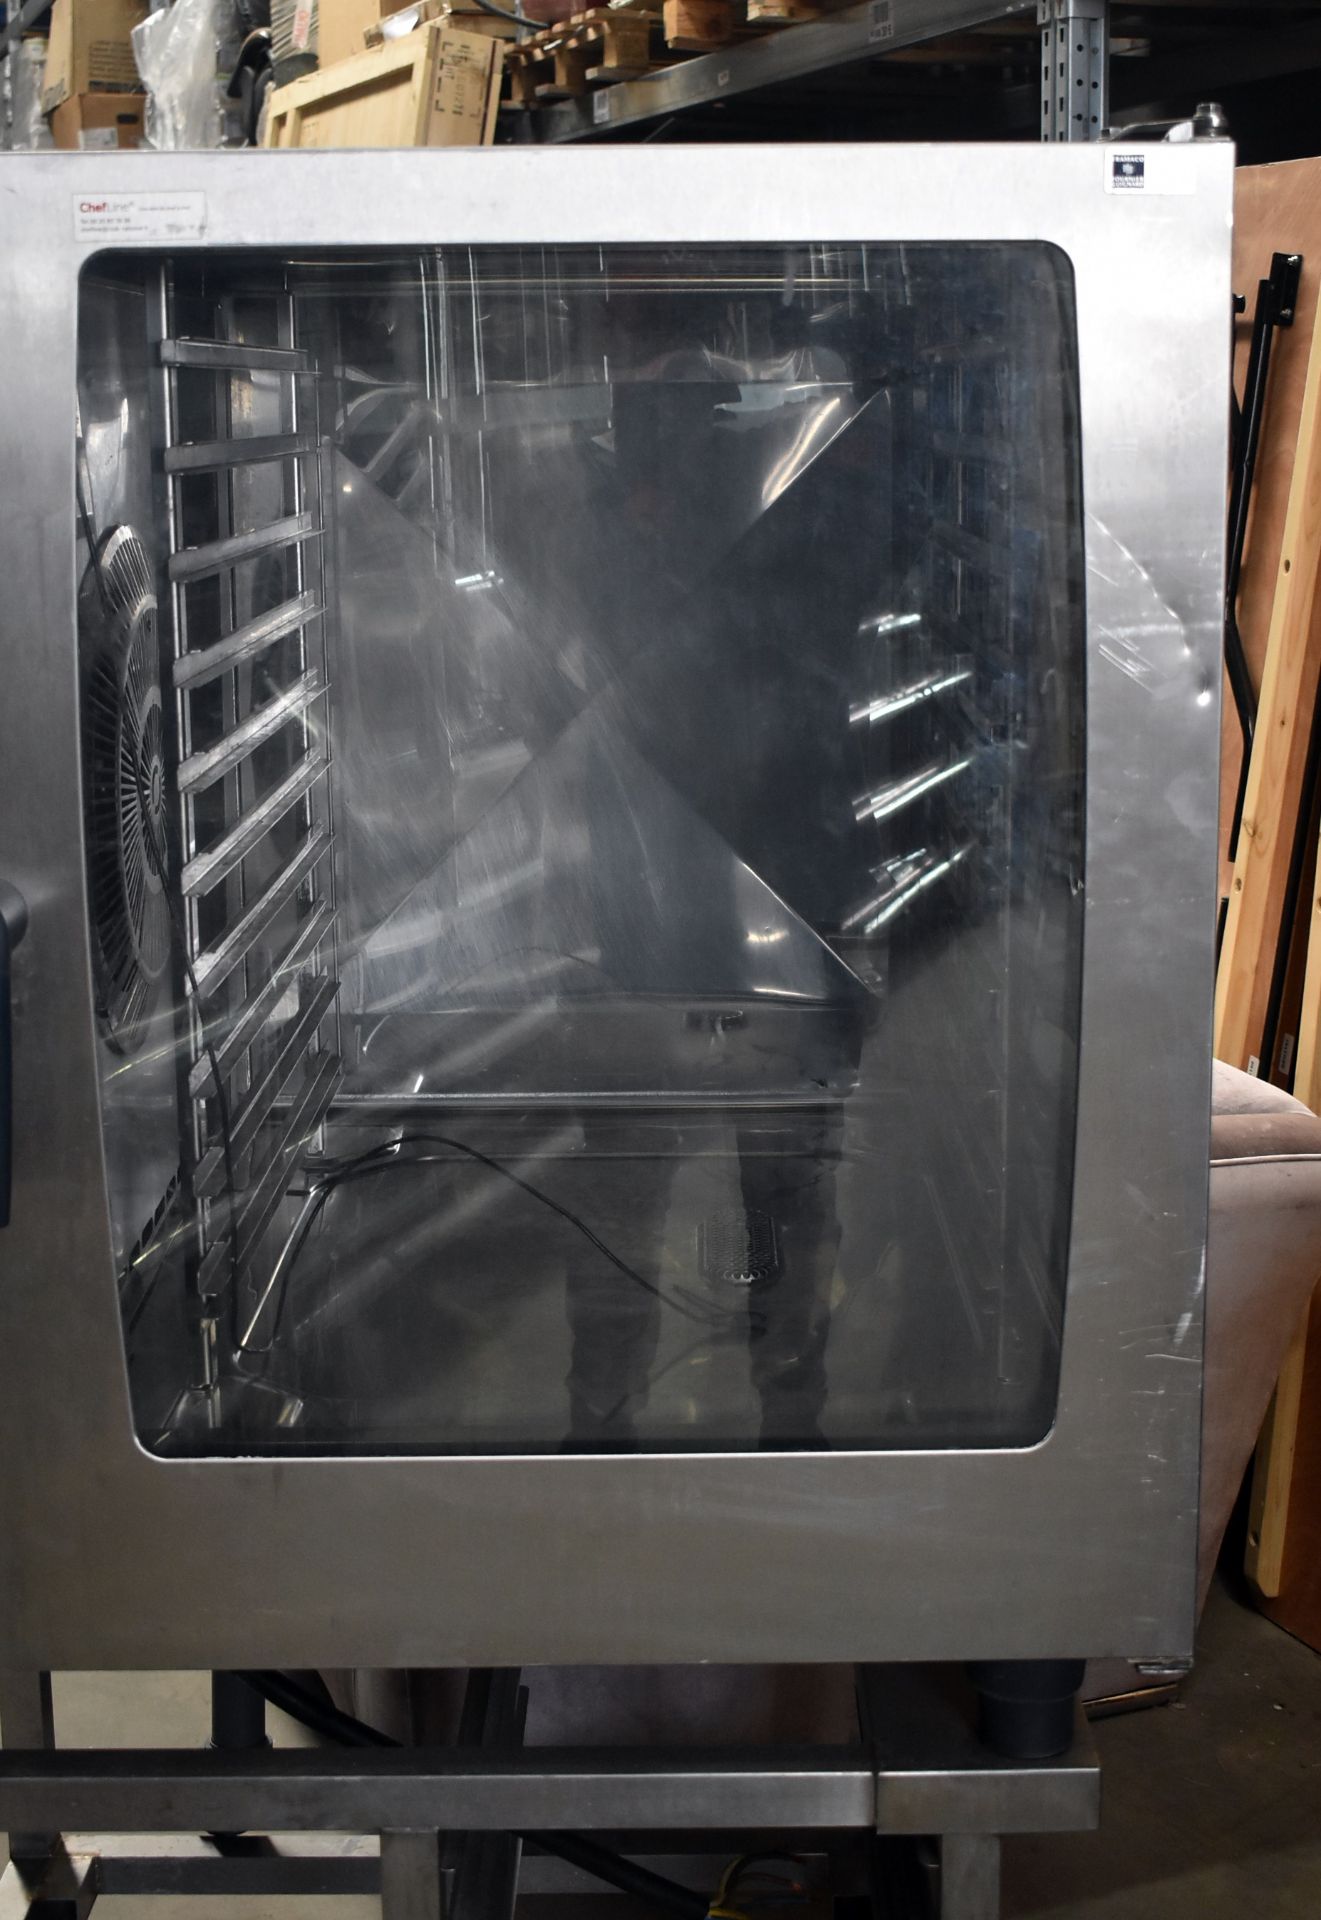 1 x Rational CombiMaster Plus 10 Grid Combi Oven - Type: CMP 102 - 3 Phase - Image 3 of 23